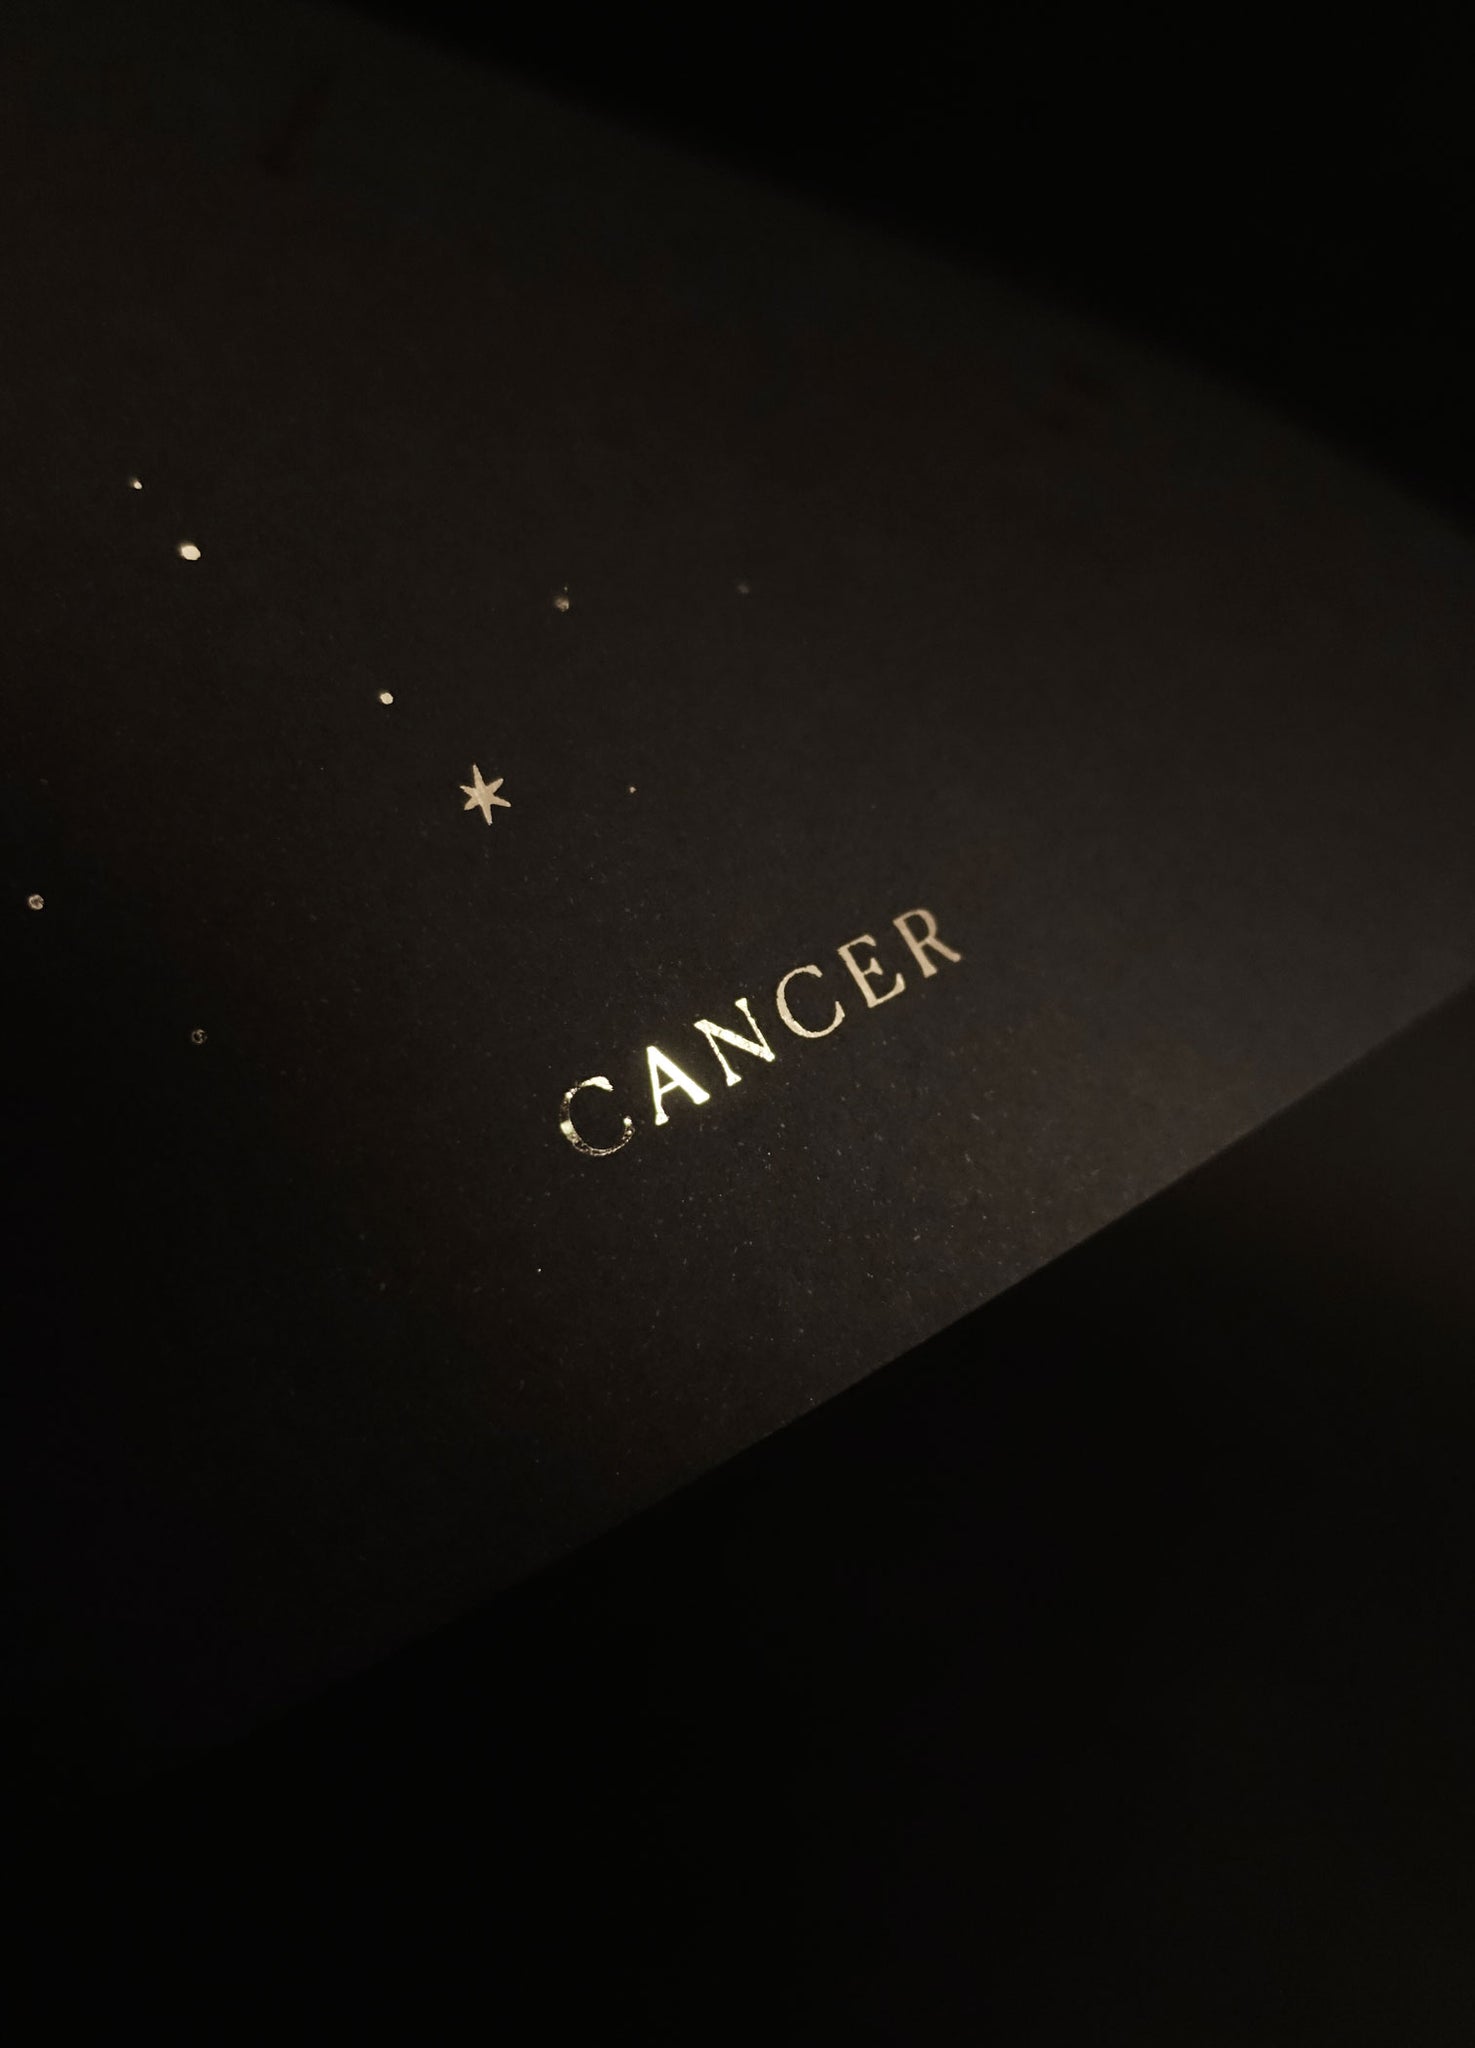 Cancer zodiac constellation gold metallic foil print on black paper by Cocorrina